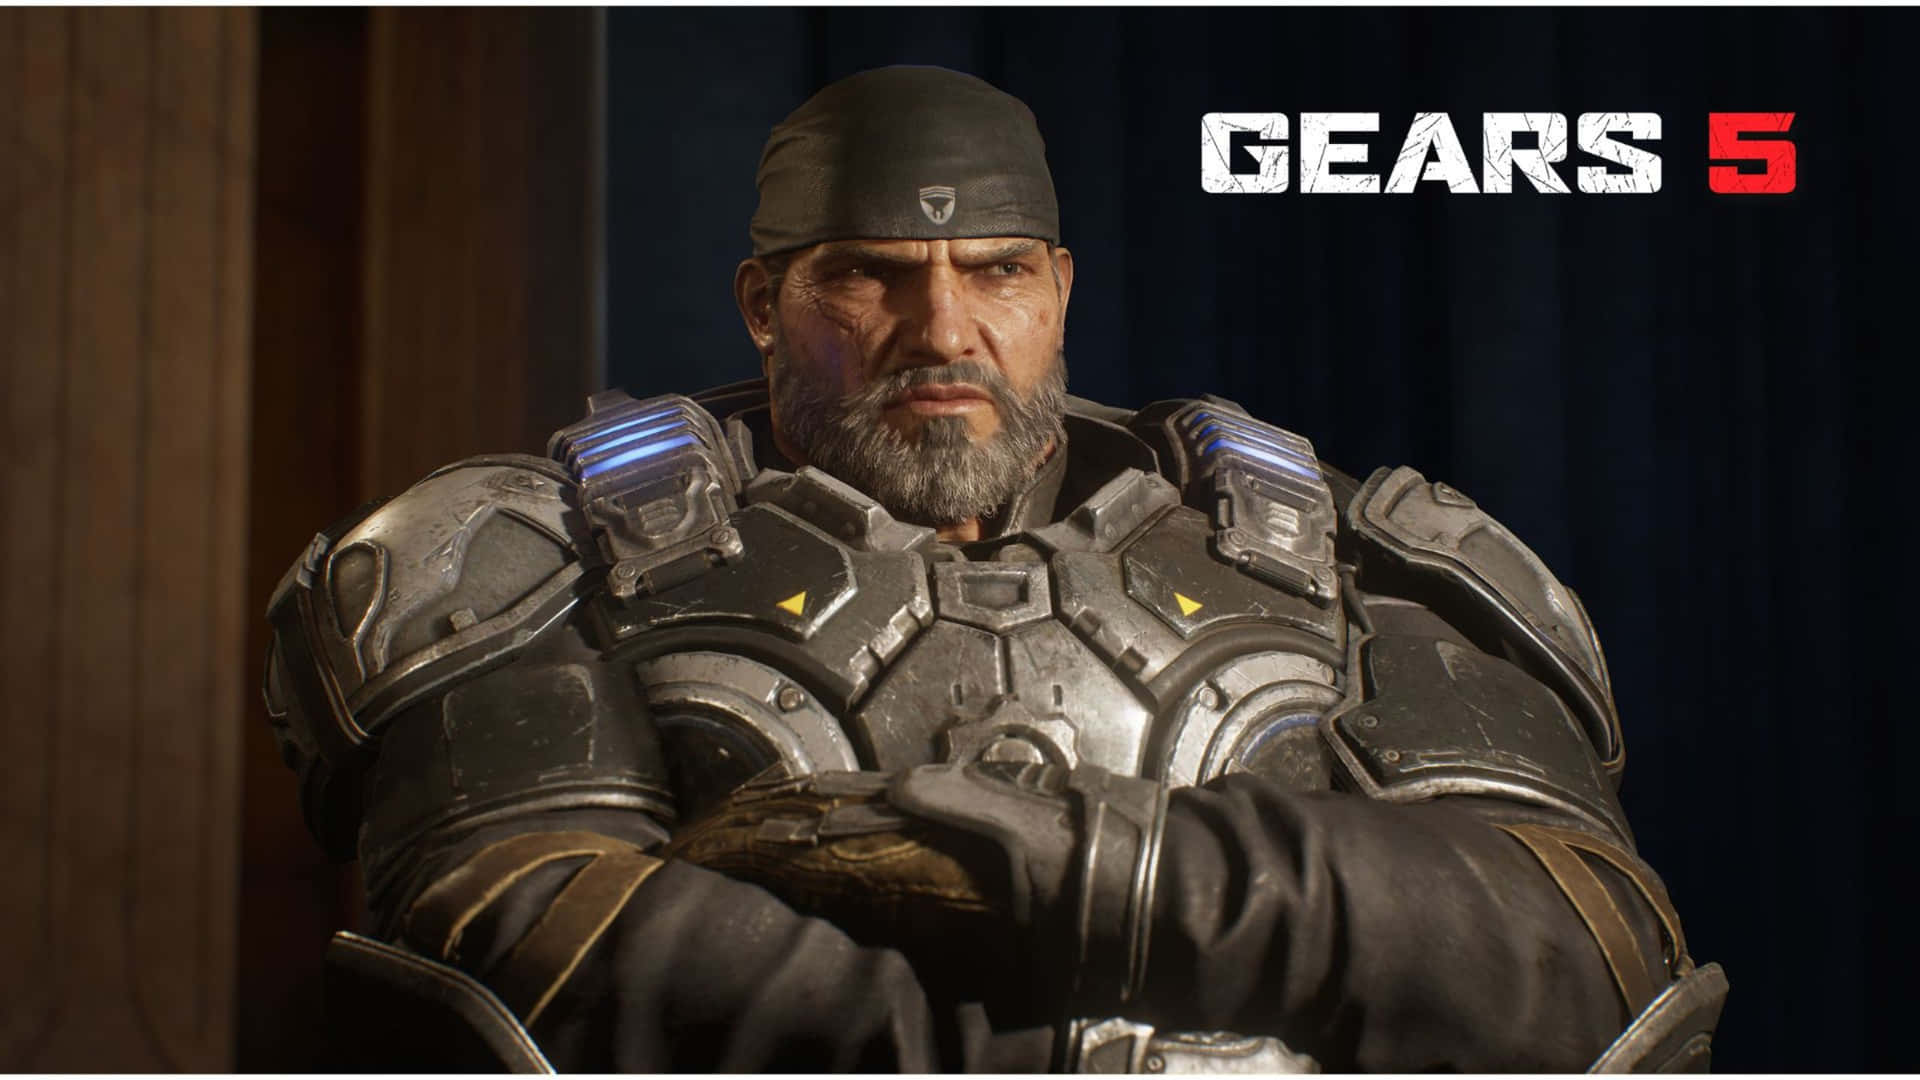 Gears 5 - A Man In Armor With His Arms Crossed